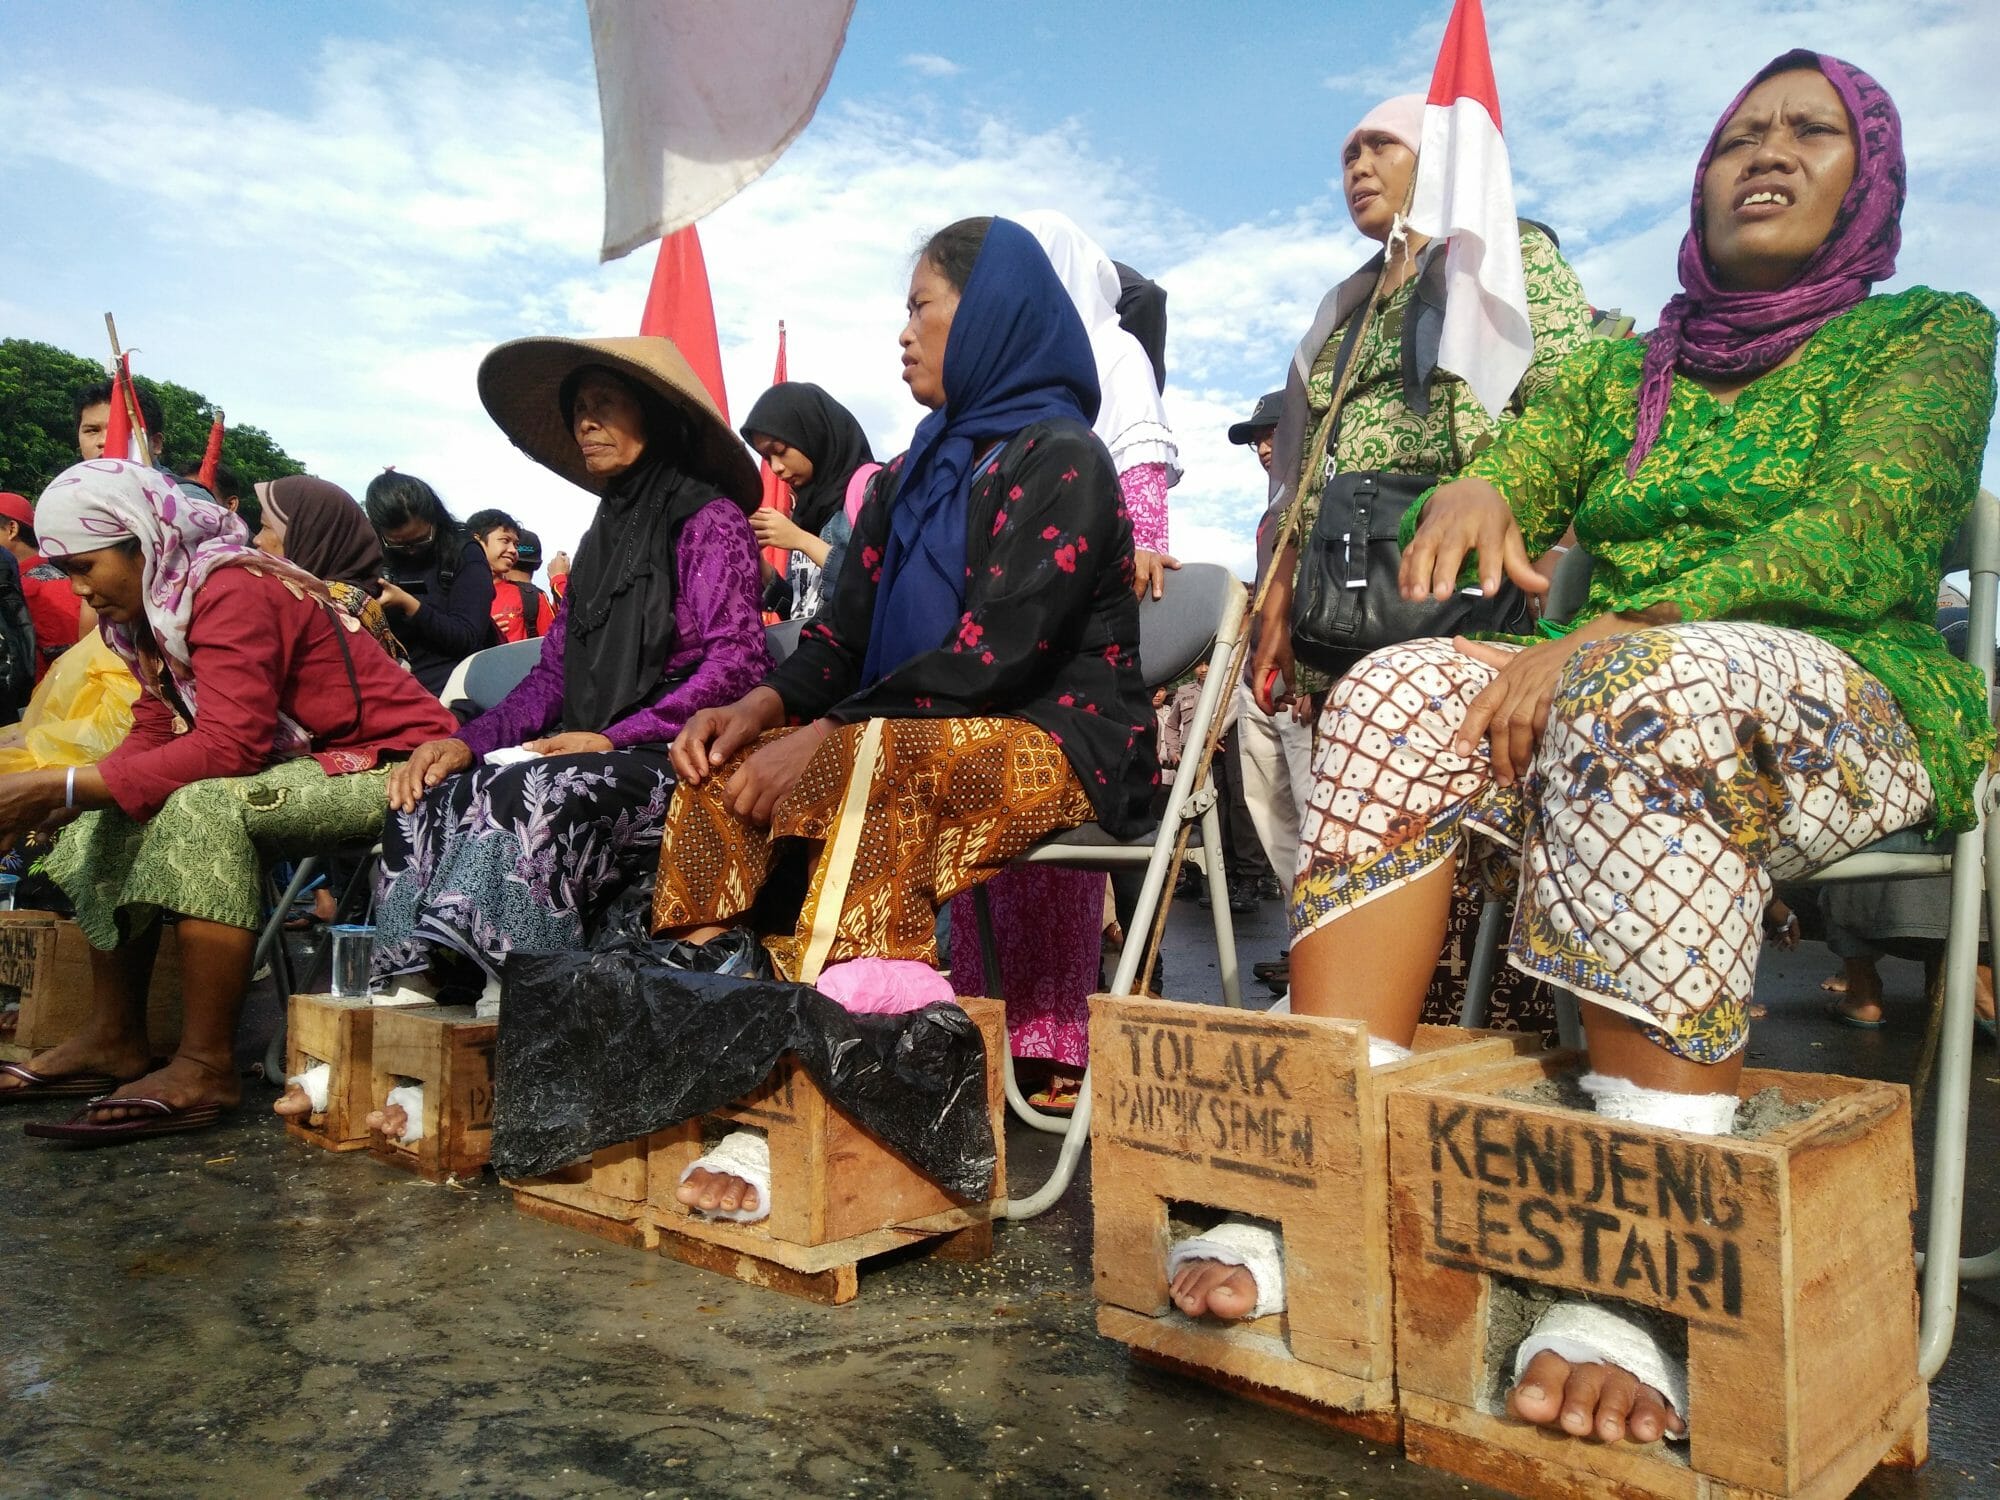 Women in Kendeng, Indonesia have been fighting against a state-owned